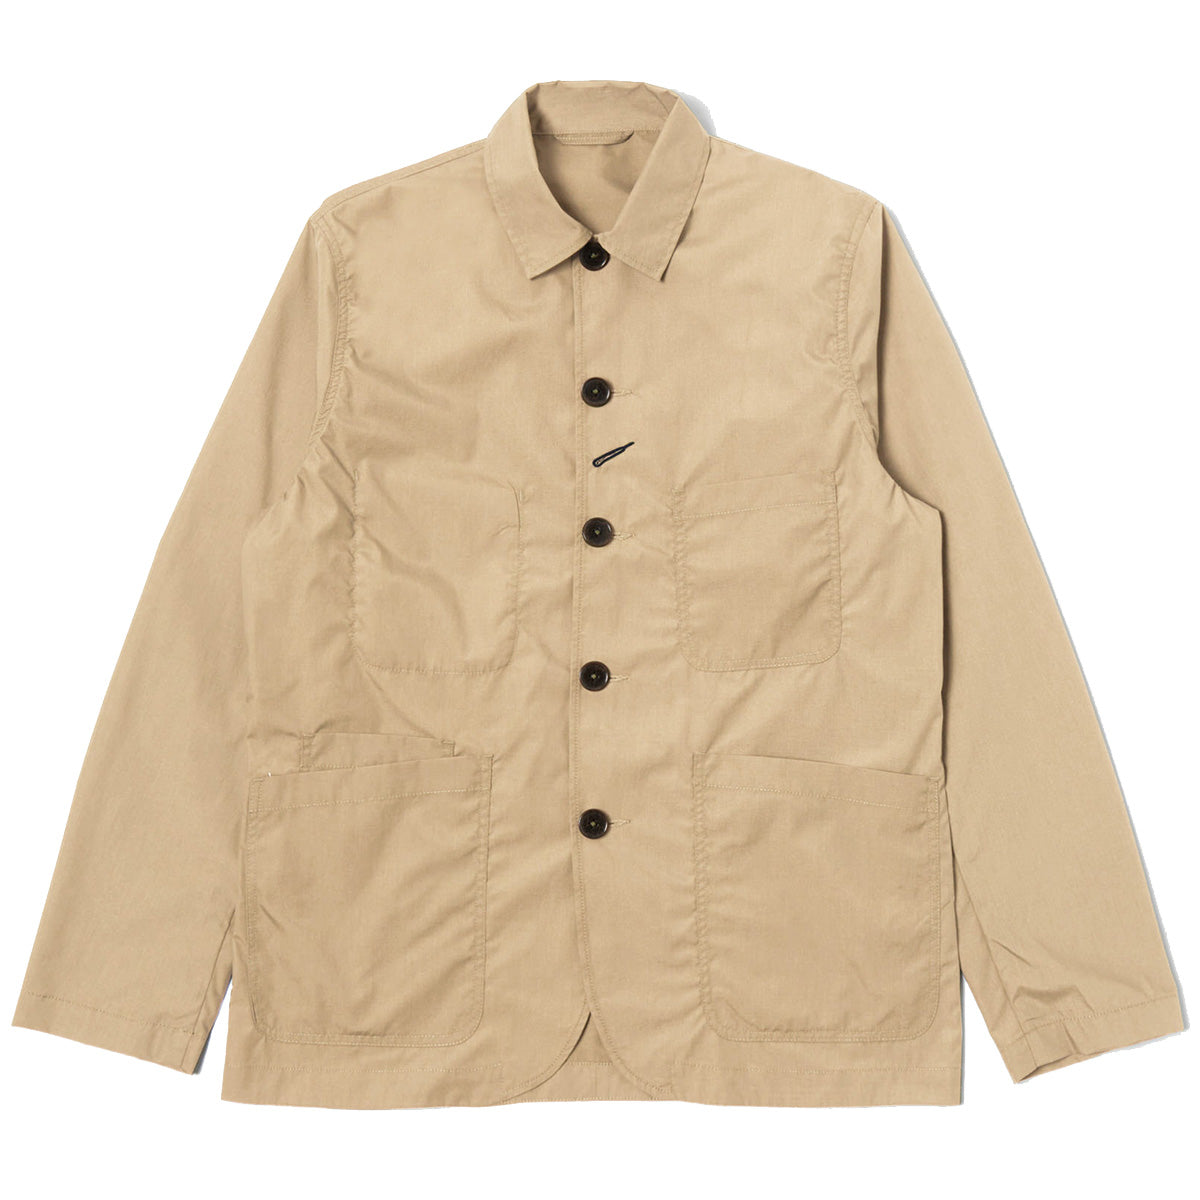 Bakers Jacket - Sand Recycled Poly Tech